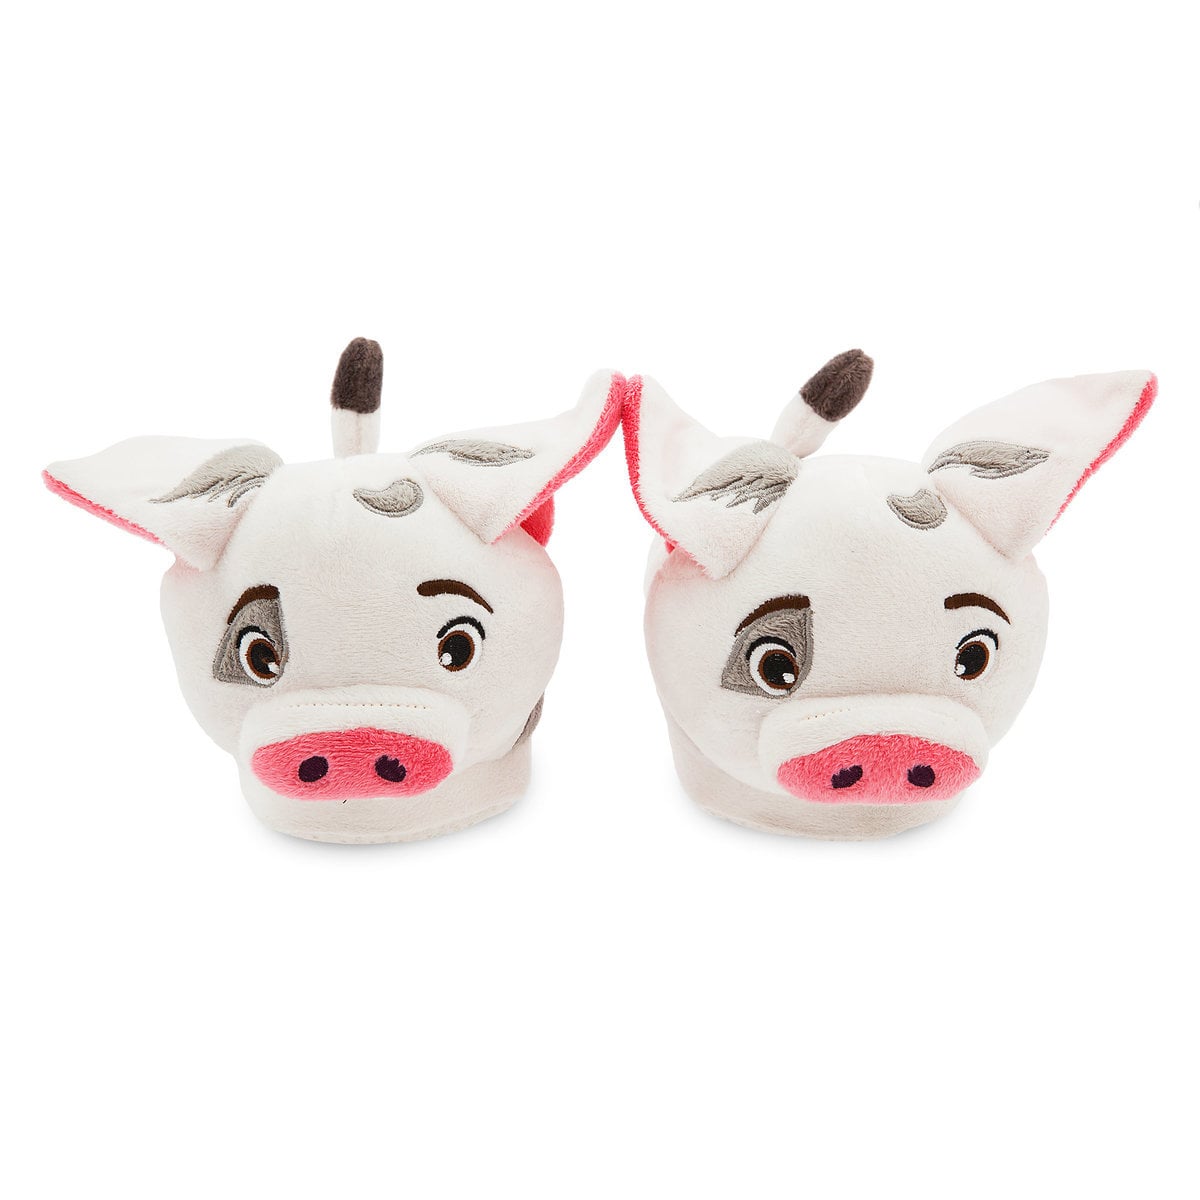 Get comfy with Moana slippers featuring Pua | Top 25 Disney Gift Ideas for Toddlers featured by top US Disney blogger, Marcie and the Mouse